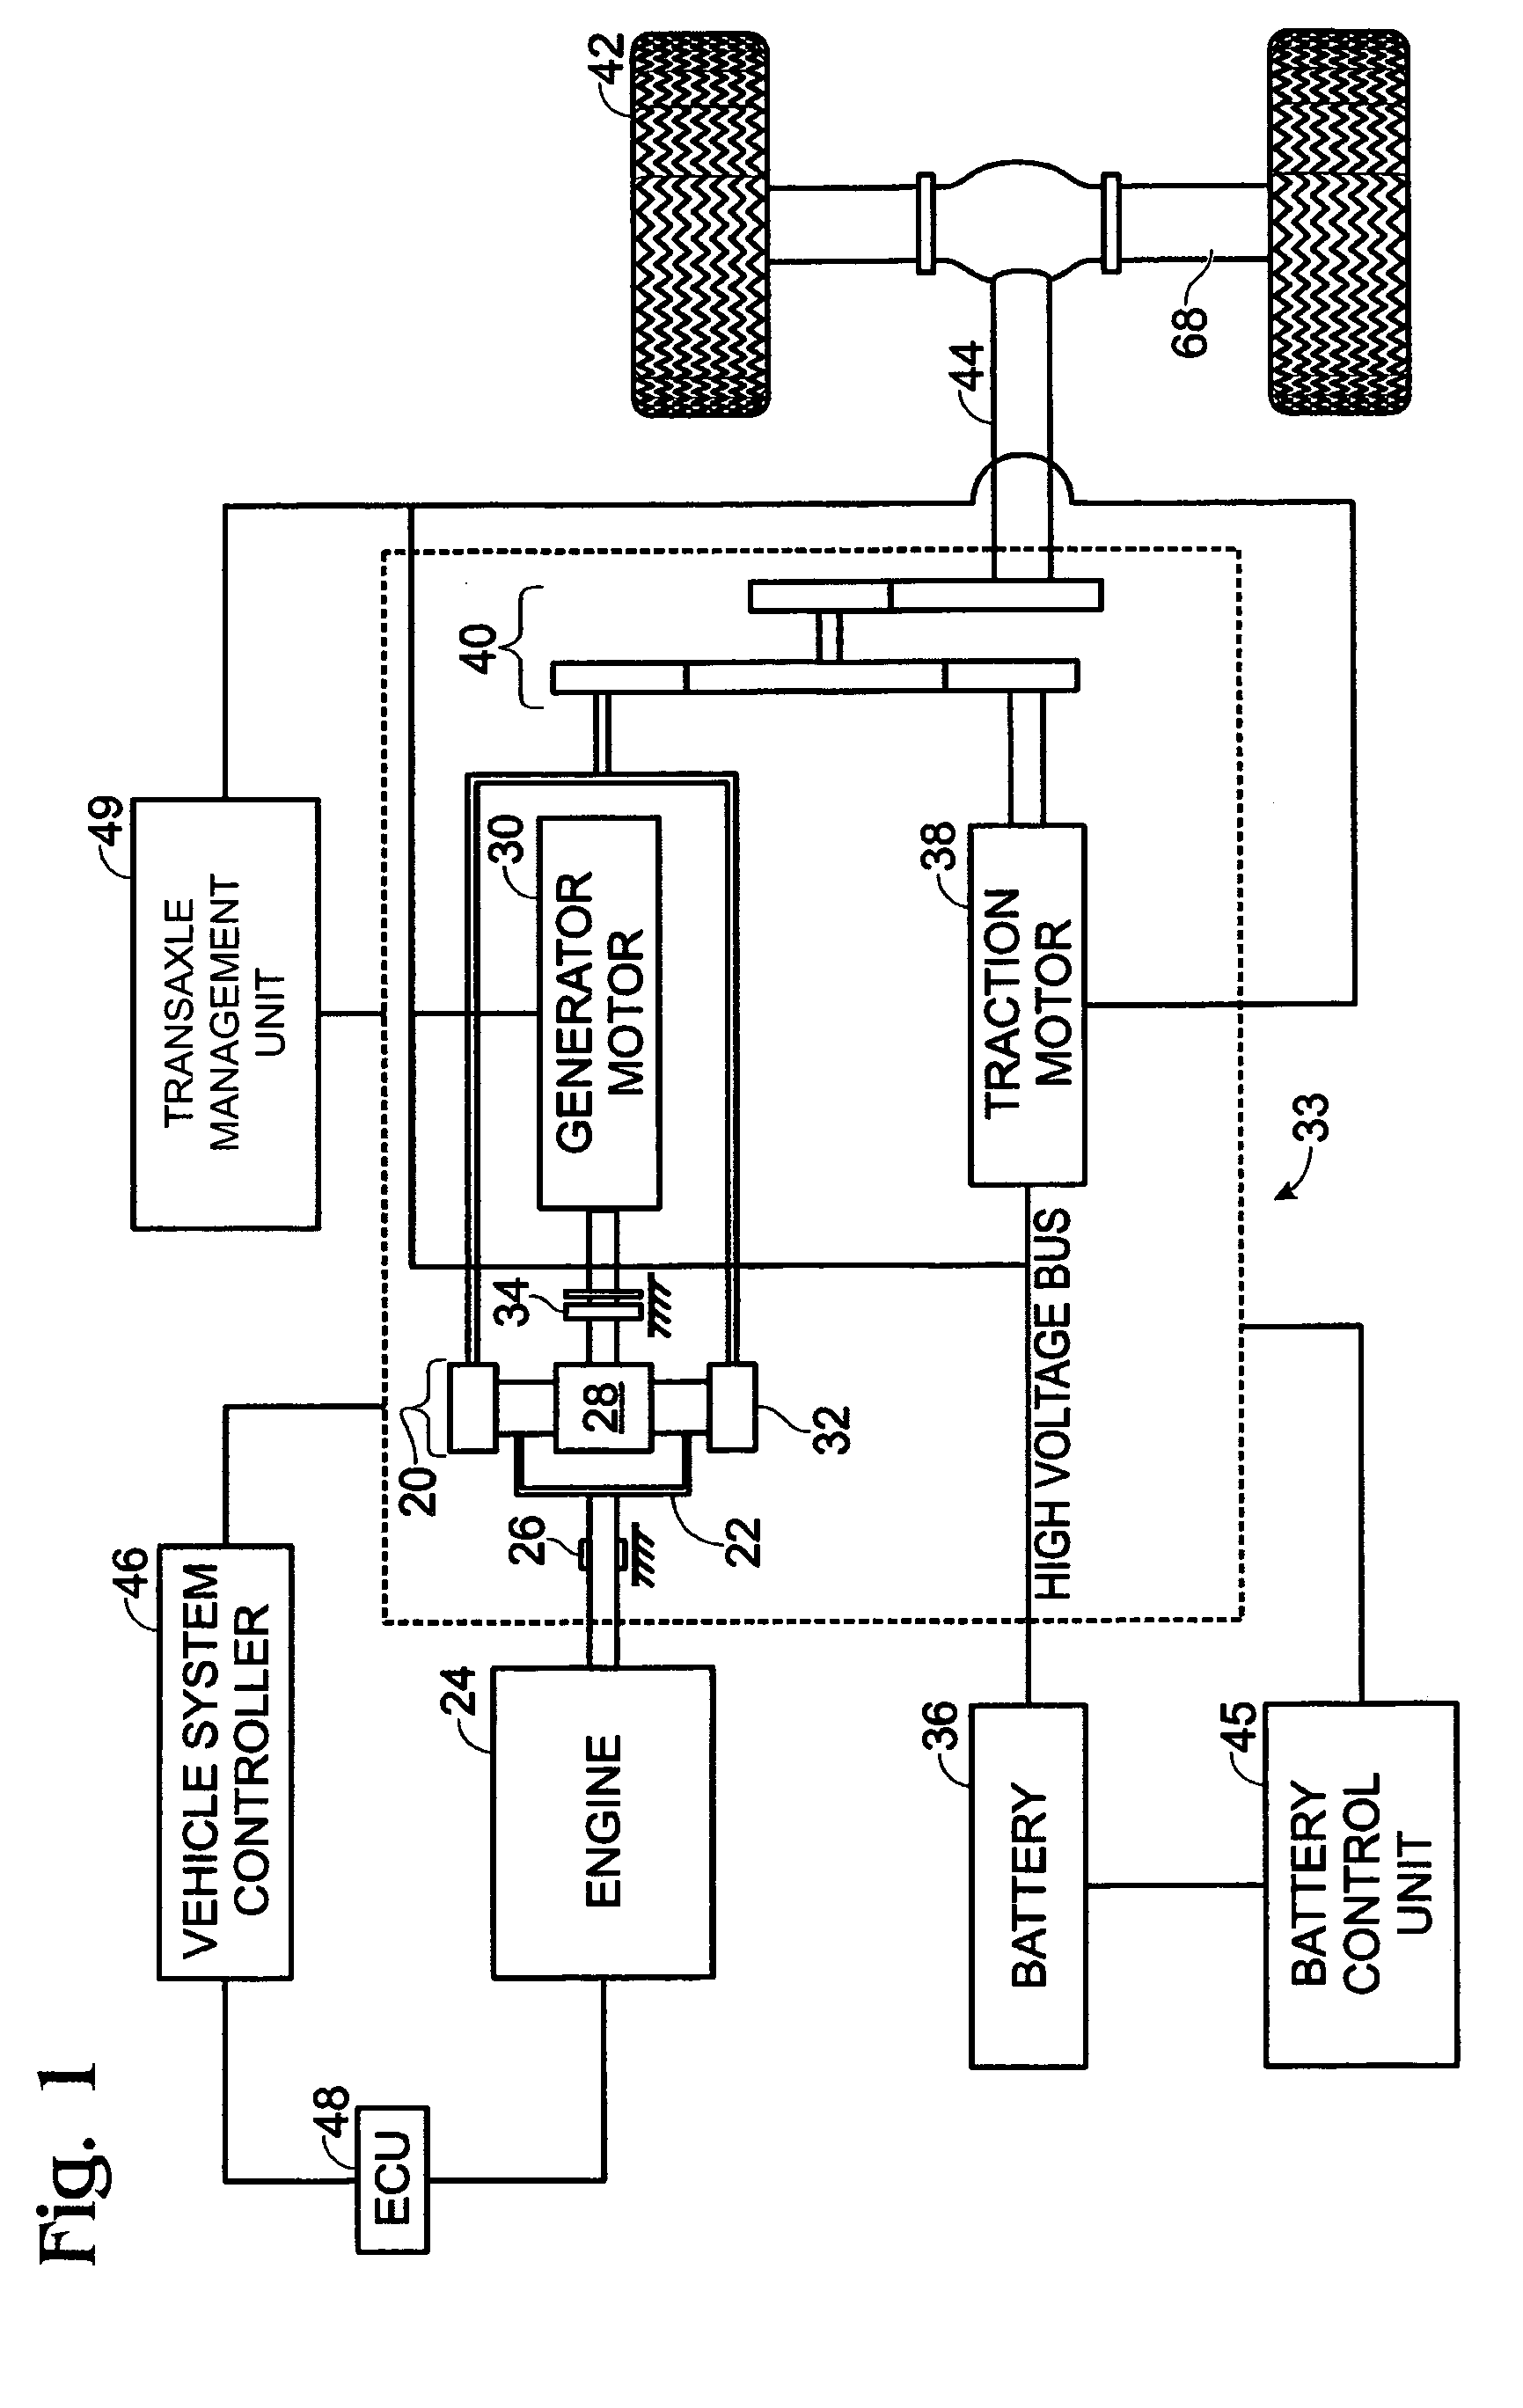 HEV internal combustion engine pre-positioning